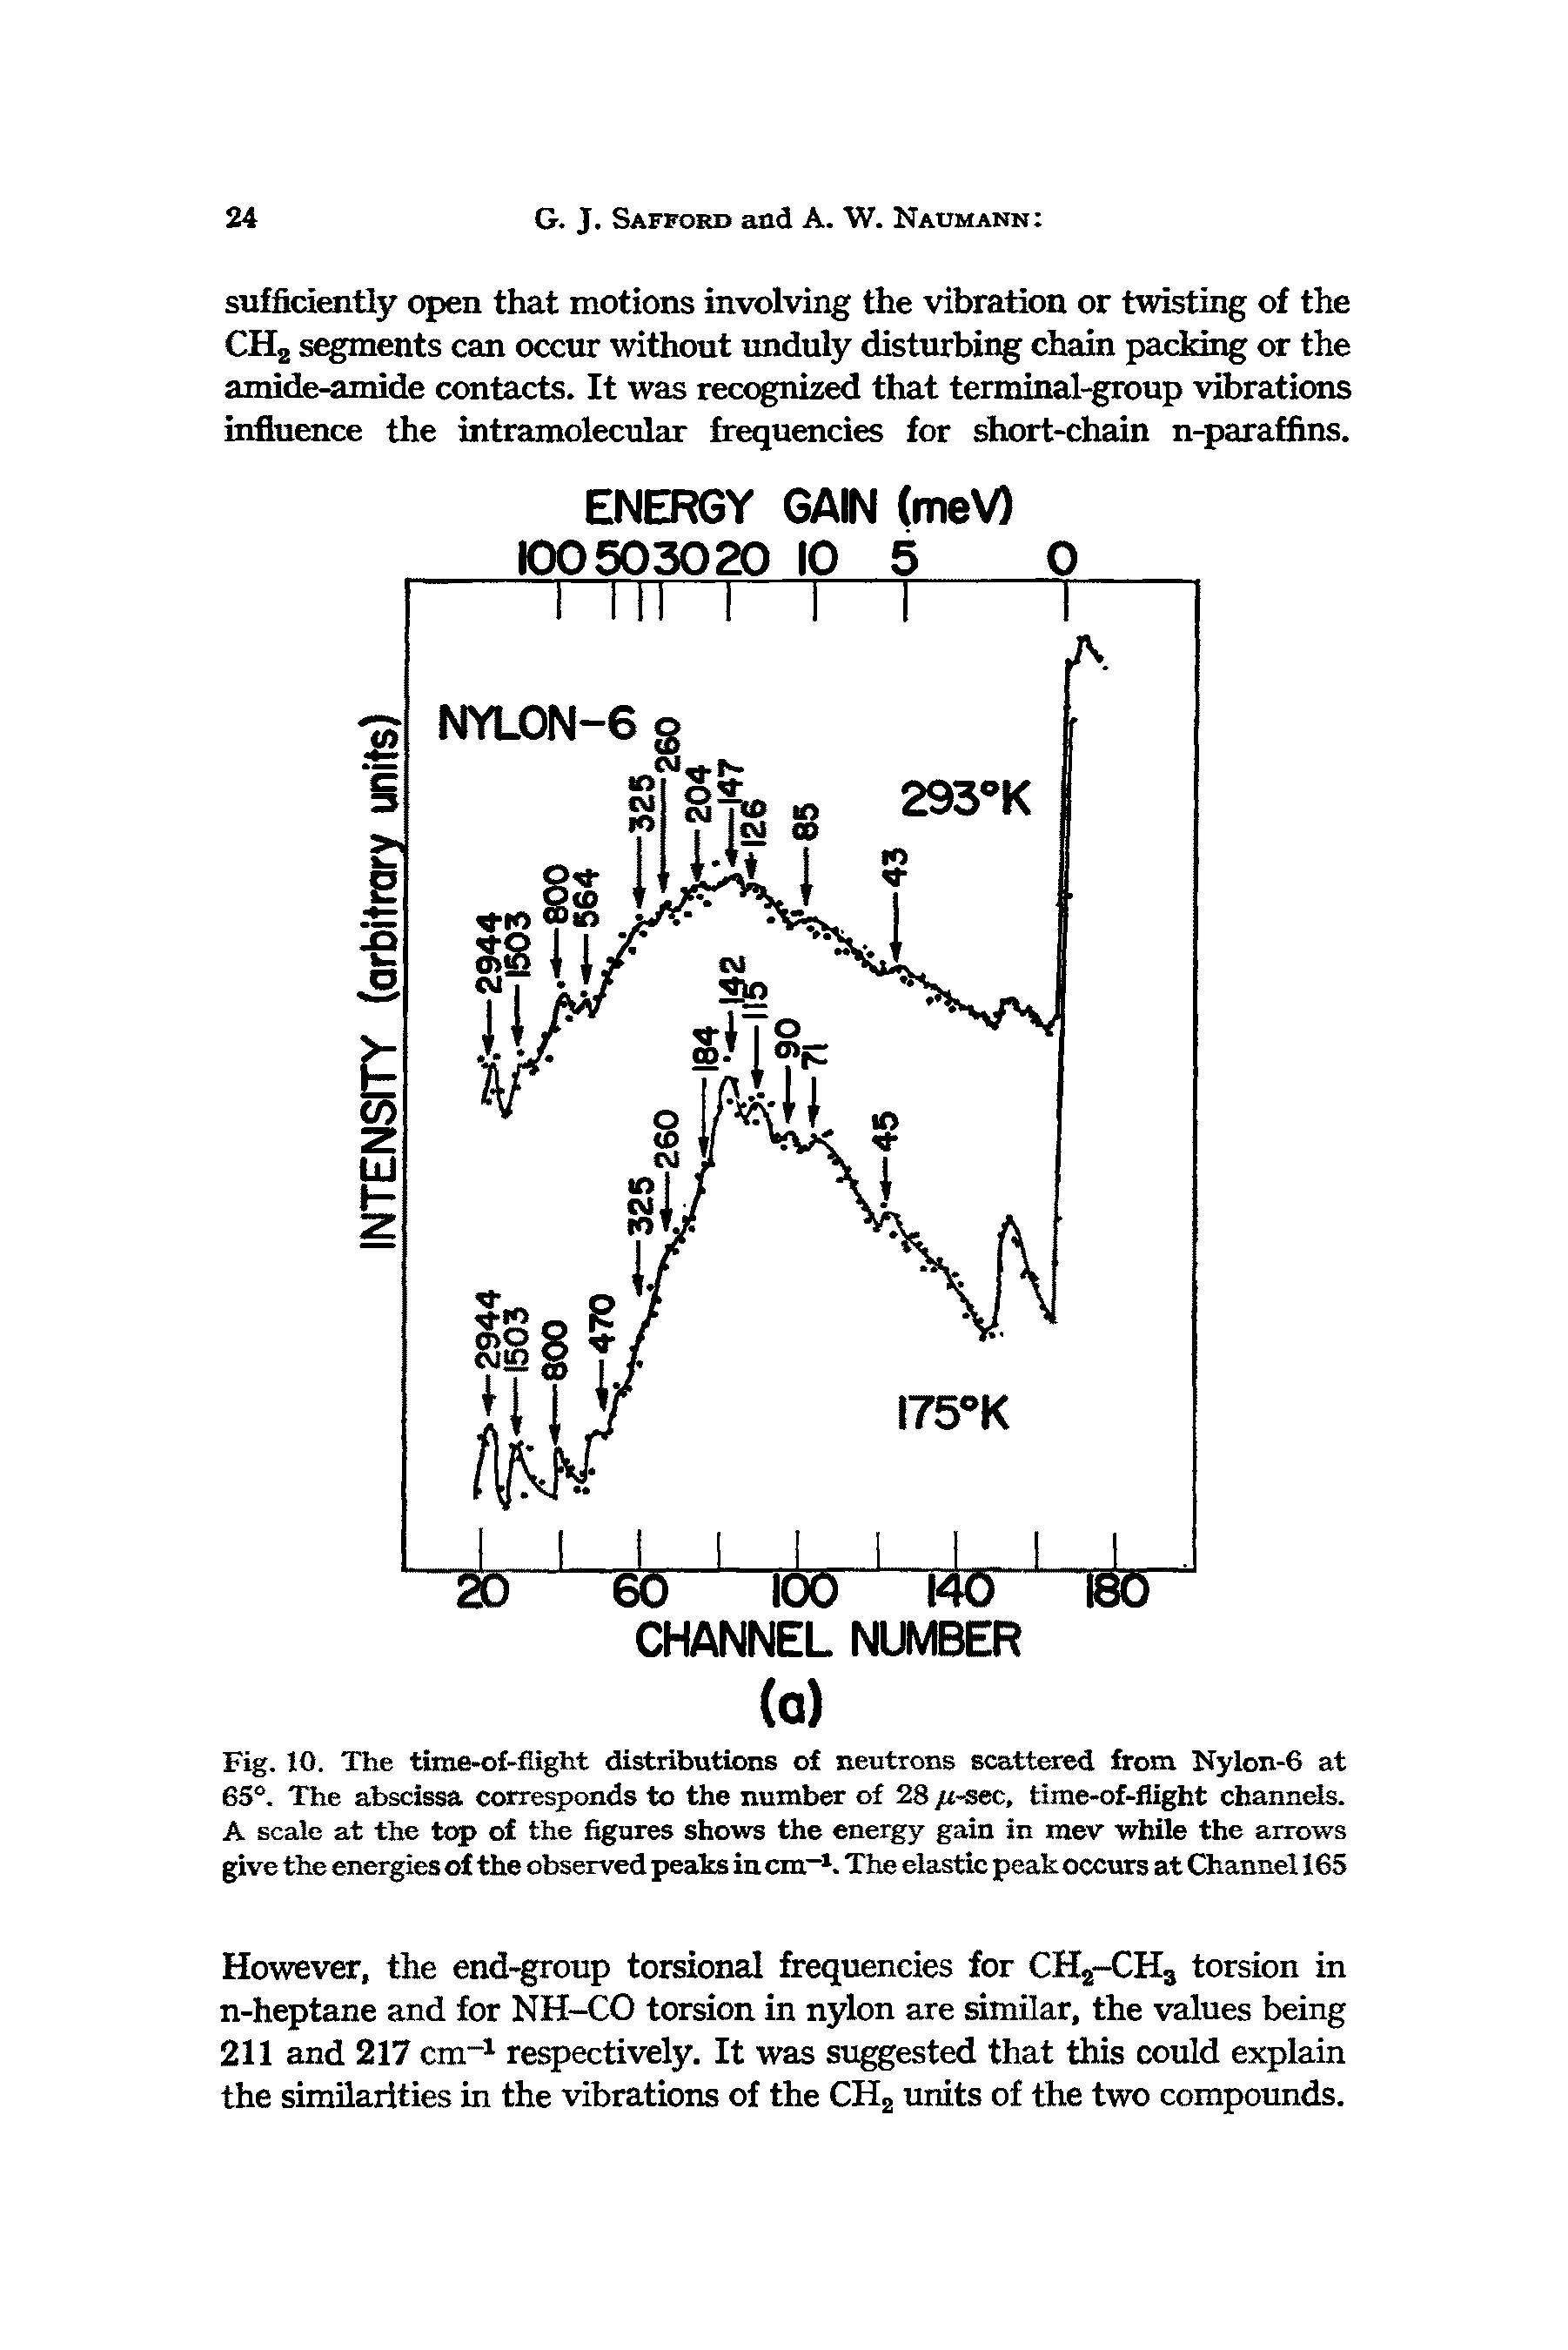 Fig. 10. The time-of-flight distributions of neutrons scattered from Nylon-6 at 65°. The abscissa corresponds to the number of 28 /4- ec, time-of-flight channels. A scale at the top of the figures shows the energy gain in mev while the arrows give the energies of the observed peaks in cm h The elastic peak occurs at Channel 165...